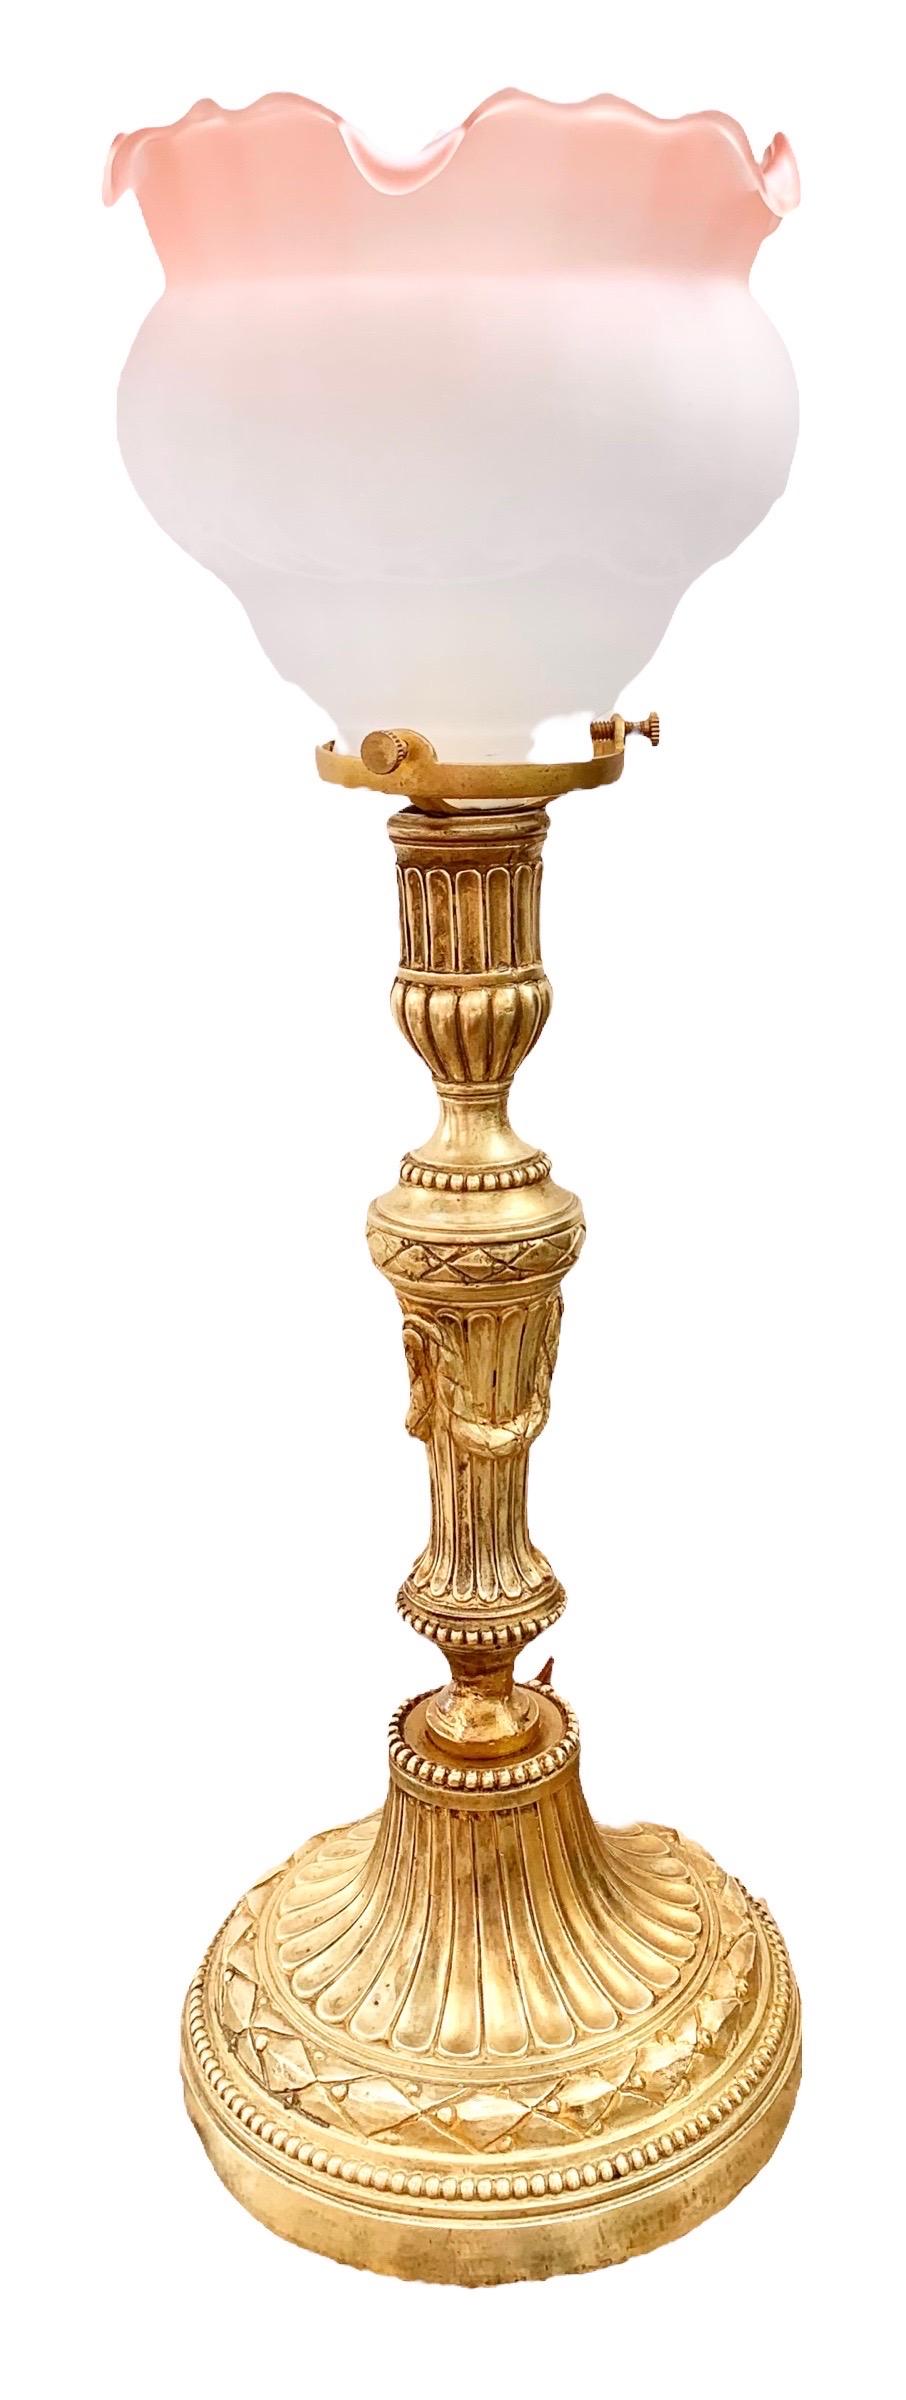 An antique French Belle Epoche gilt bronze candlestick lamp having a fine reproduction, hand made, frosted, ruffled and etched glass shade with a tinge of pink. Beautiful detailed with garlands, reeding and incised leaf borders.

It casts such an